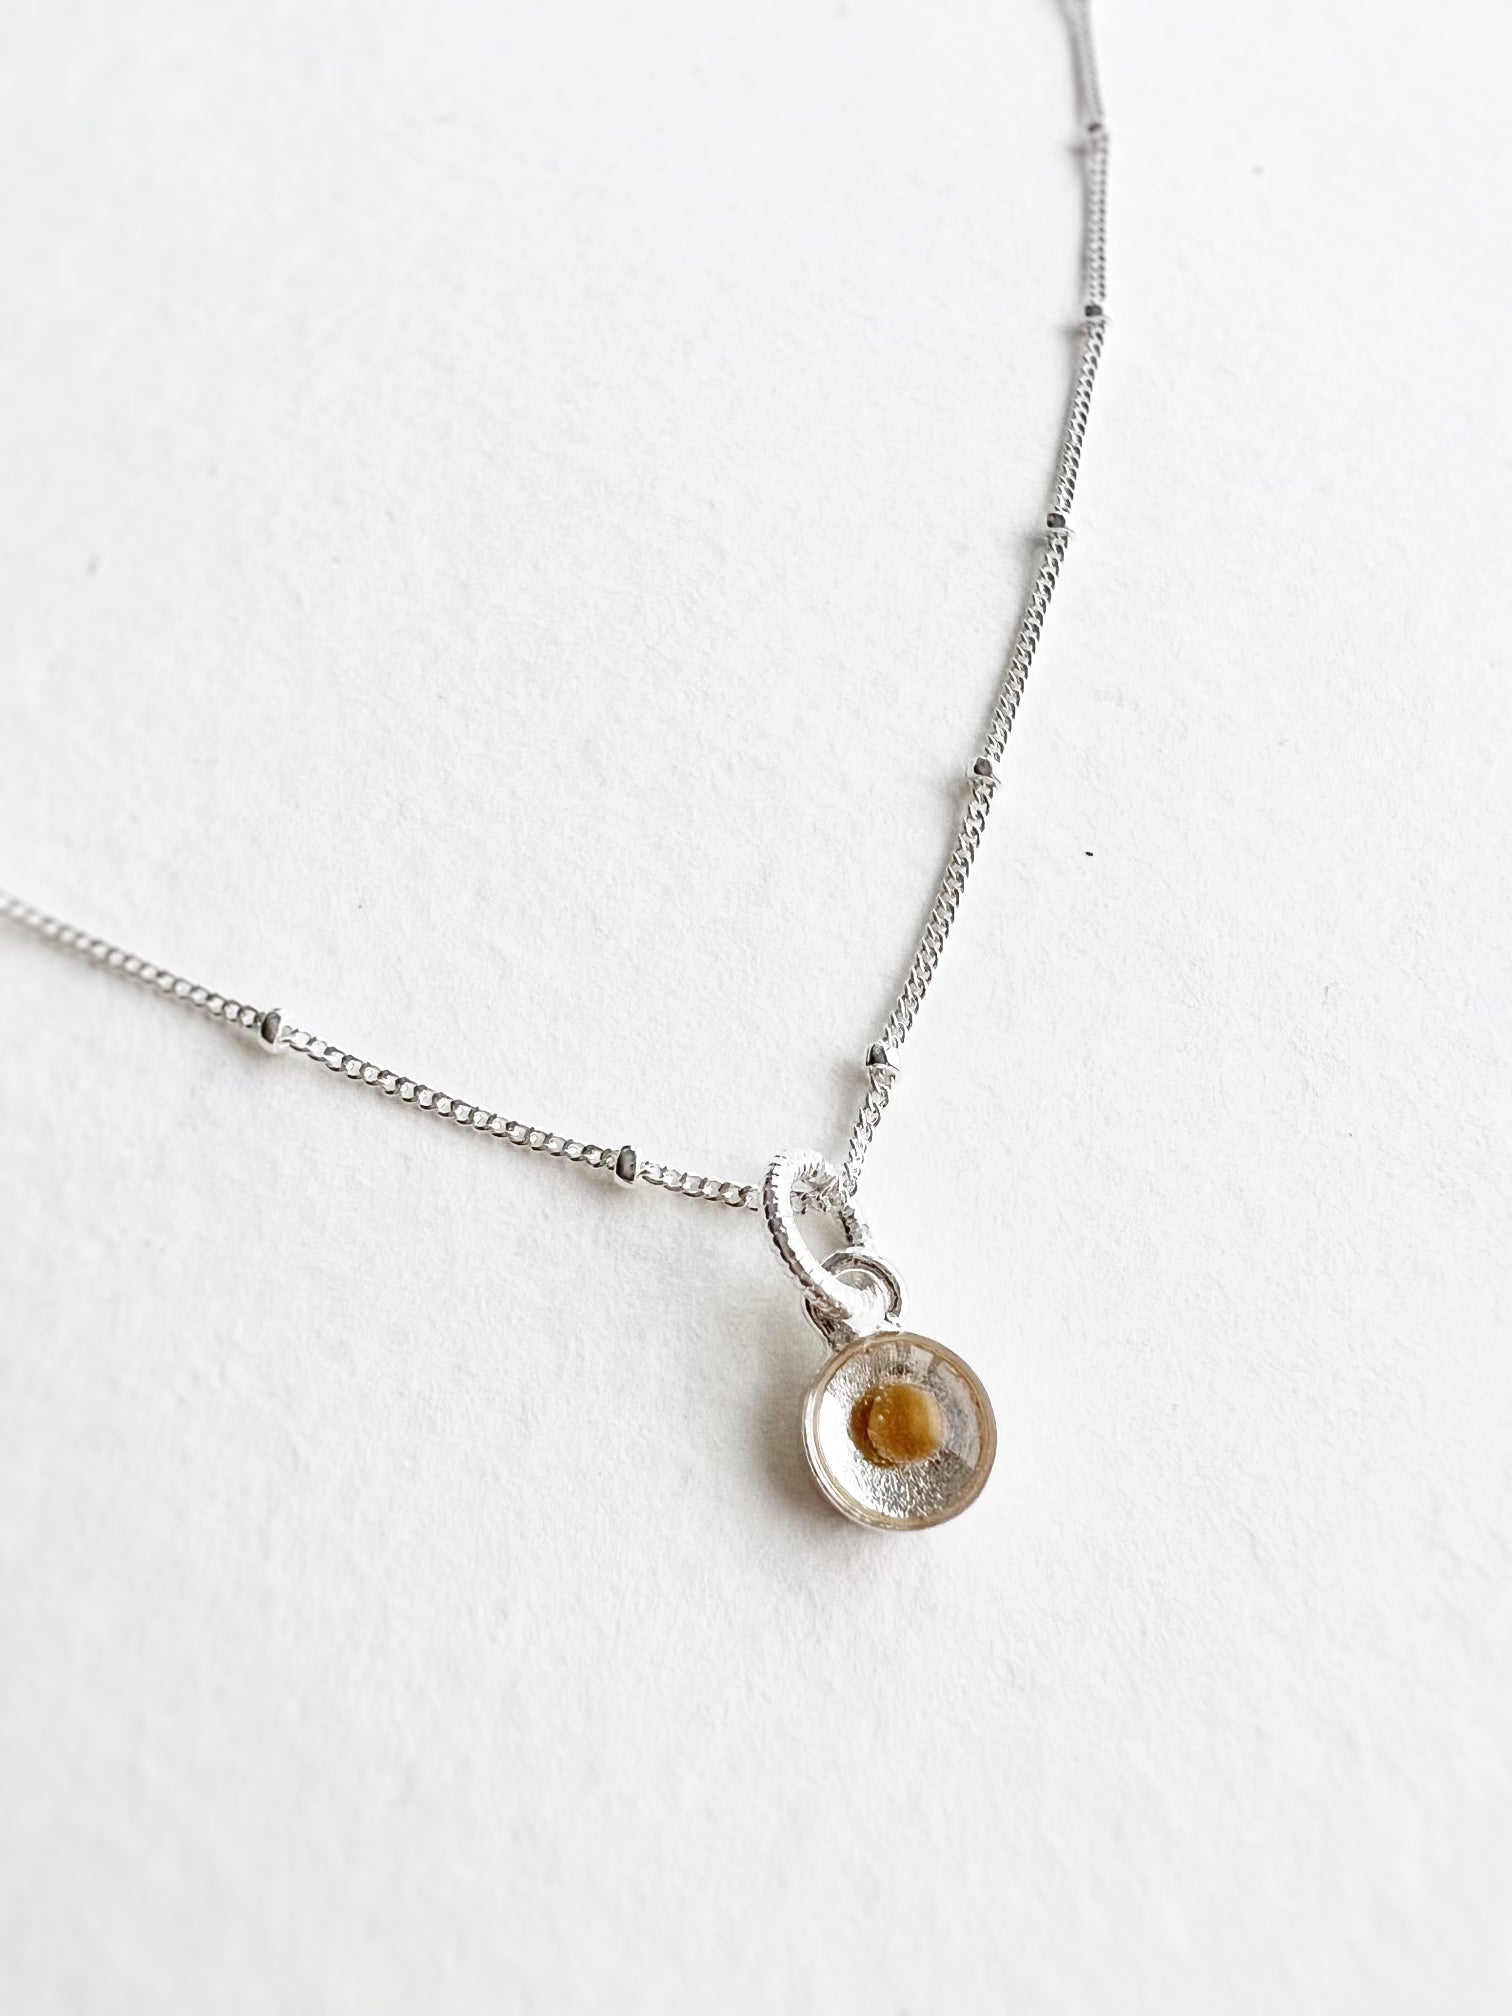 THE MUSTARD SEED NECKLACE